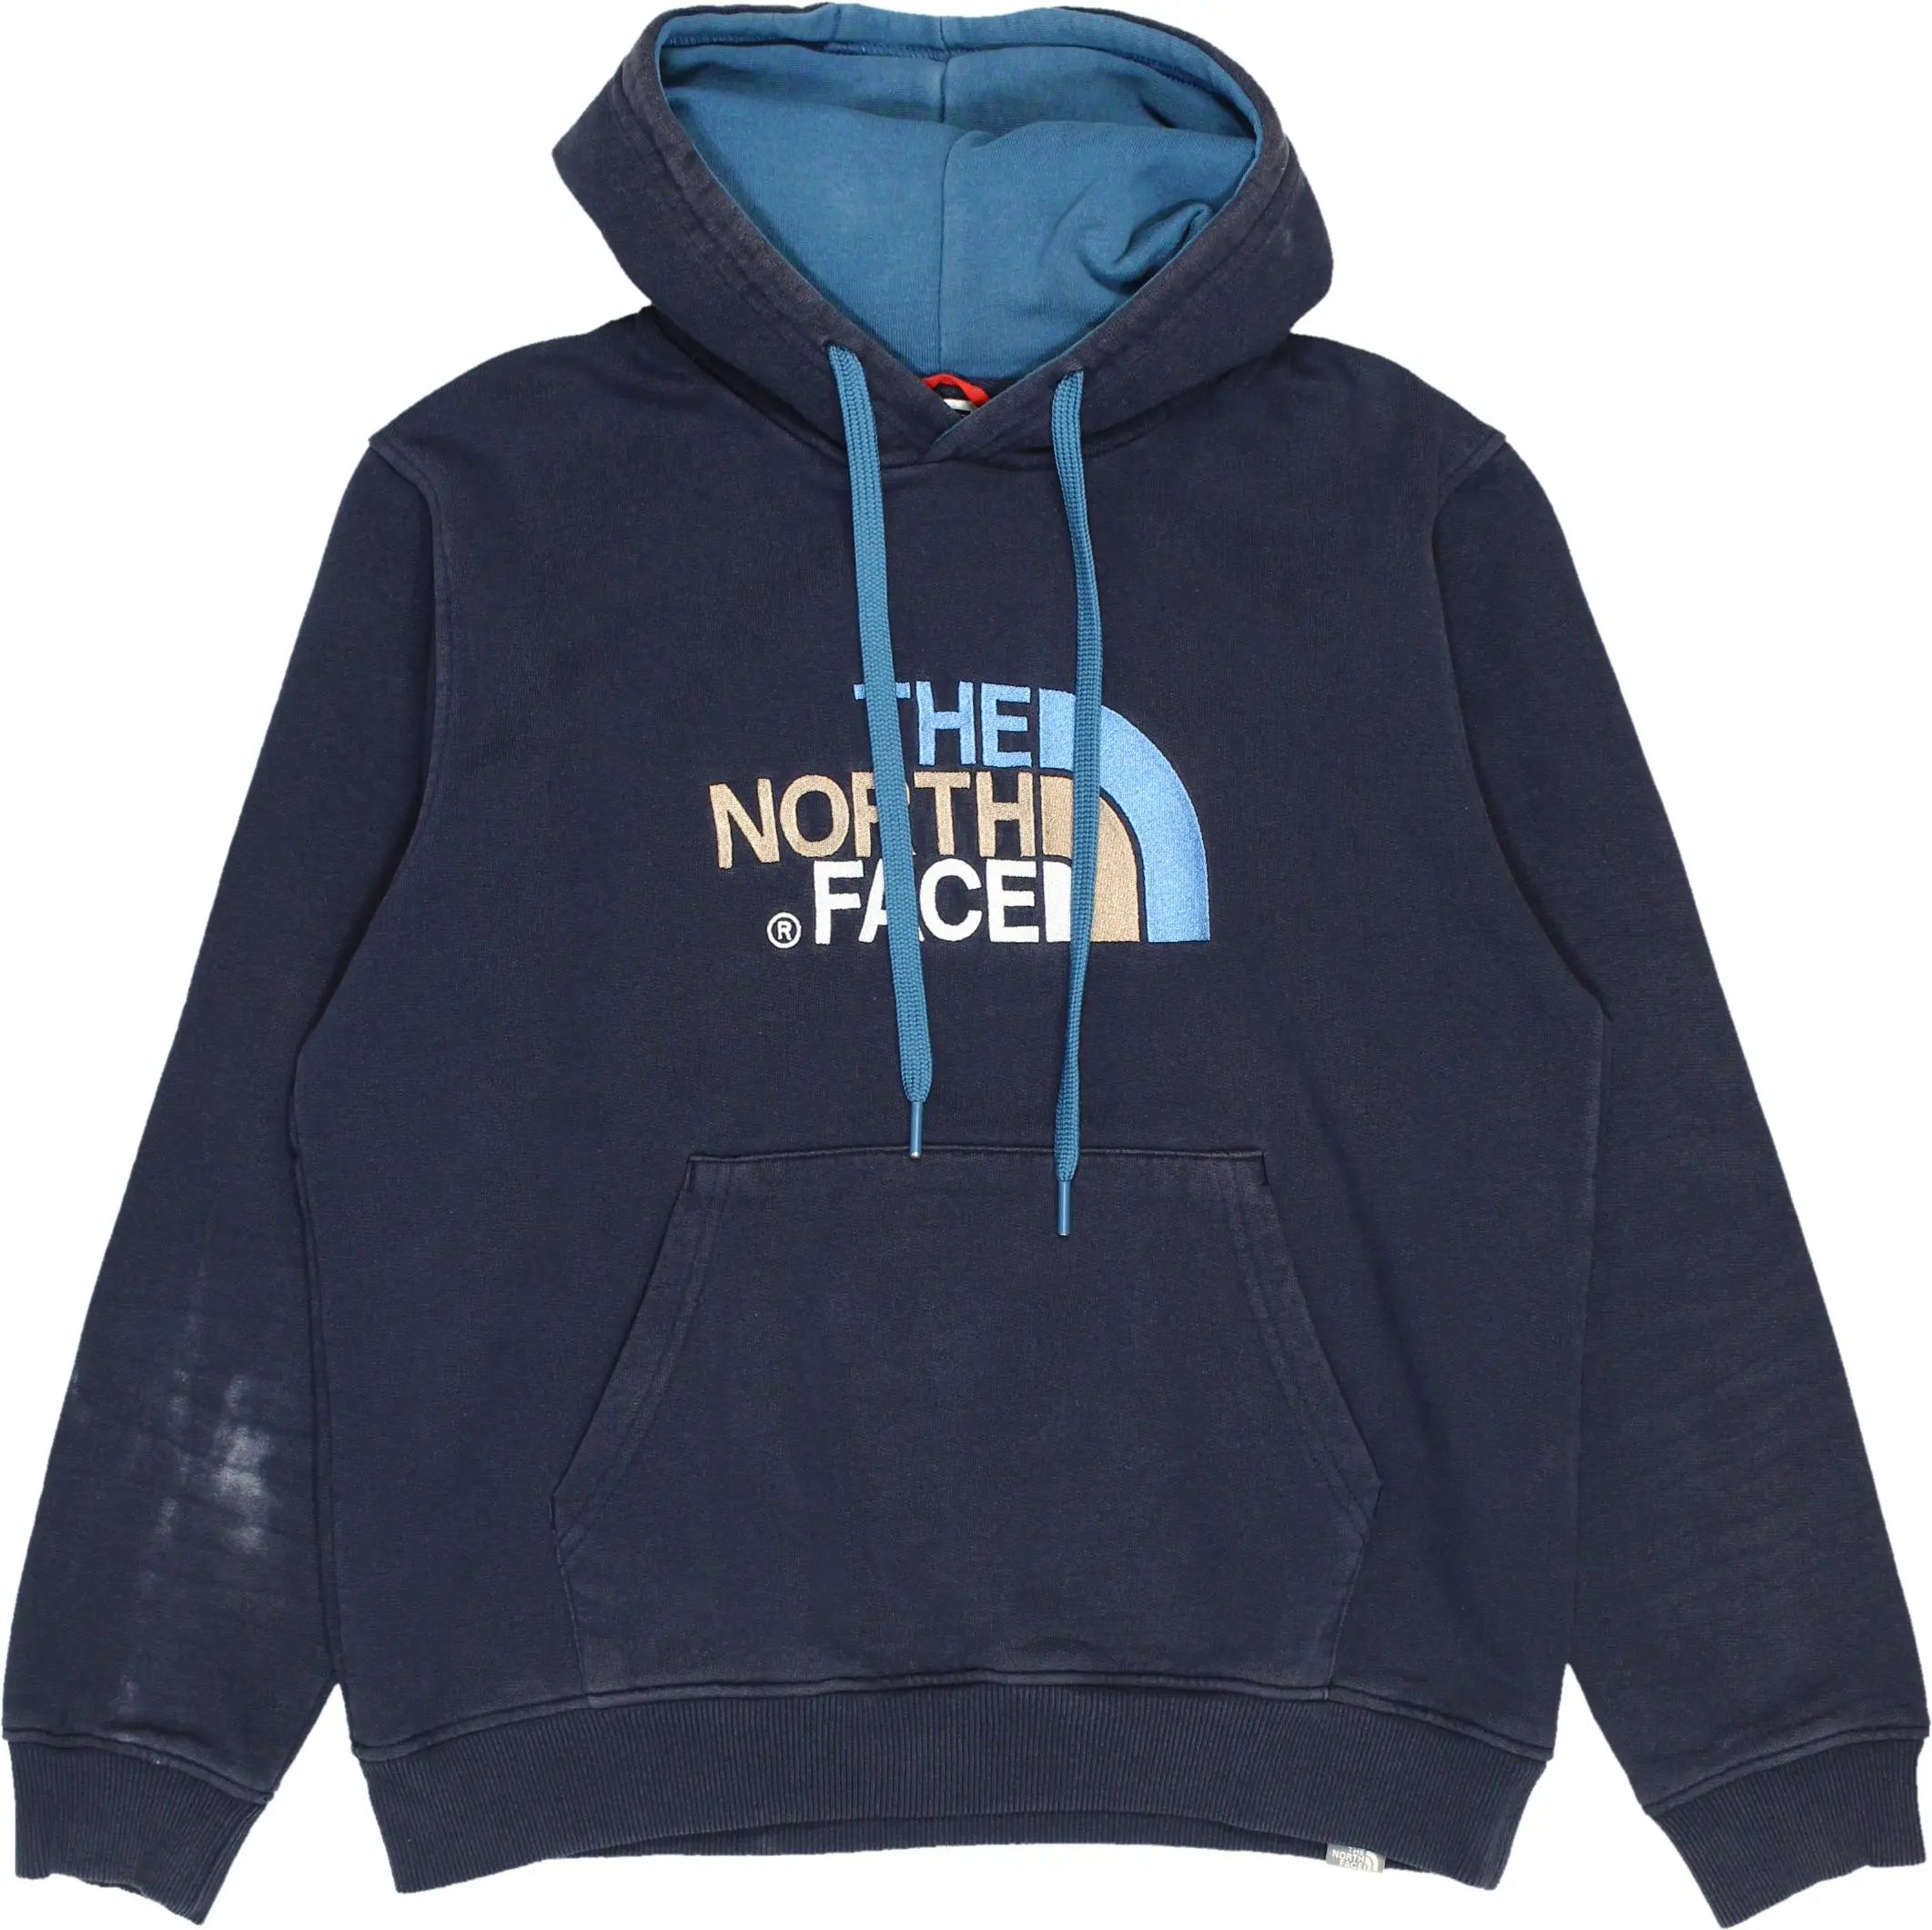 The North Face - Blue Hoodie by The North Face- ThriftTale.com - Vintage and second handclothing